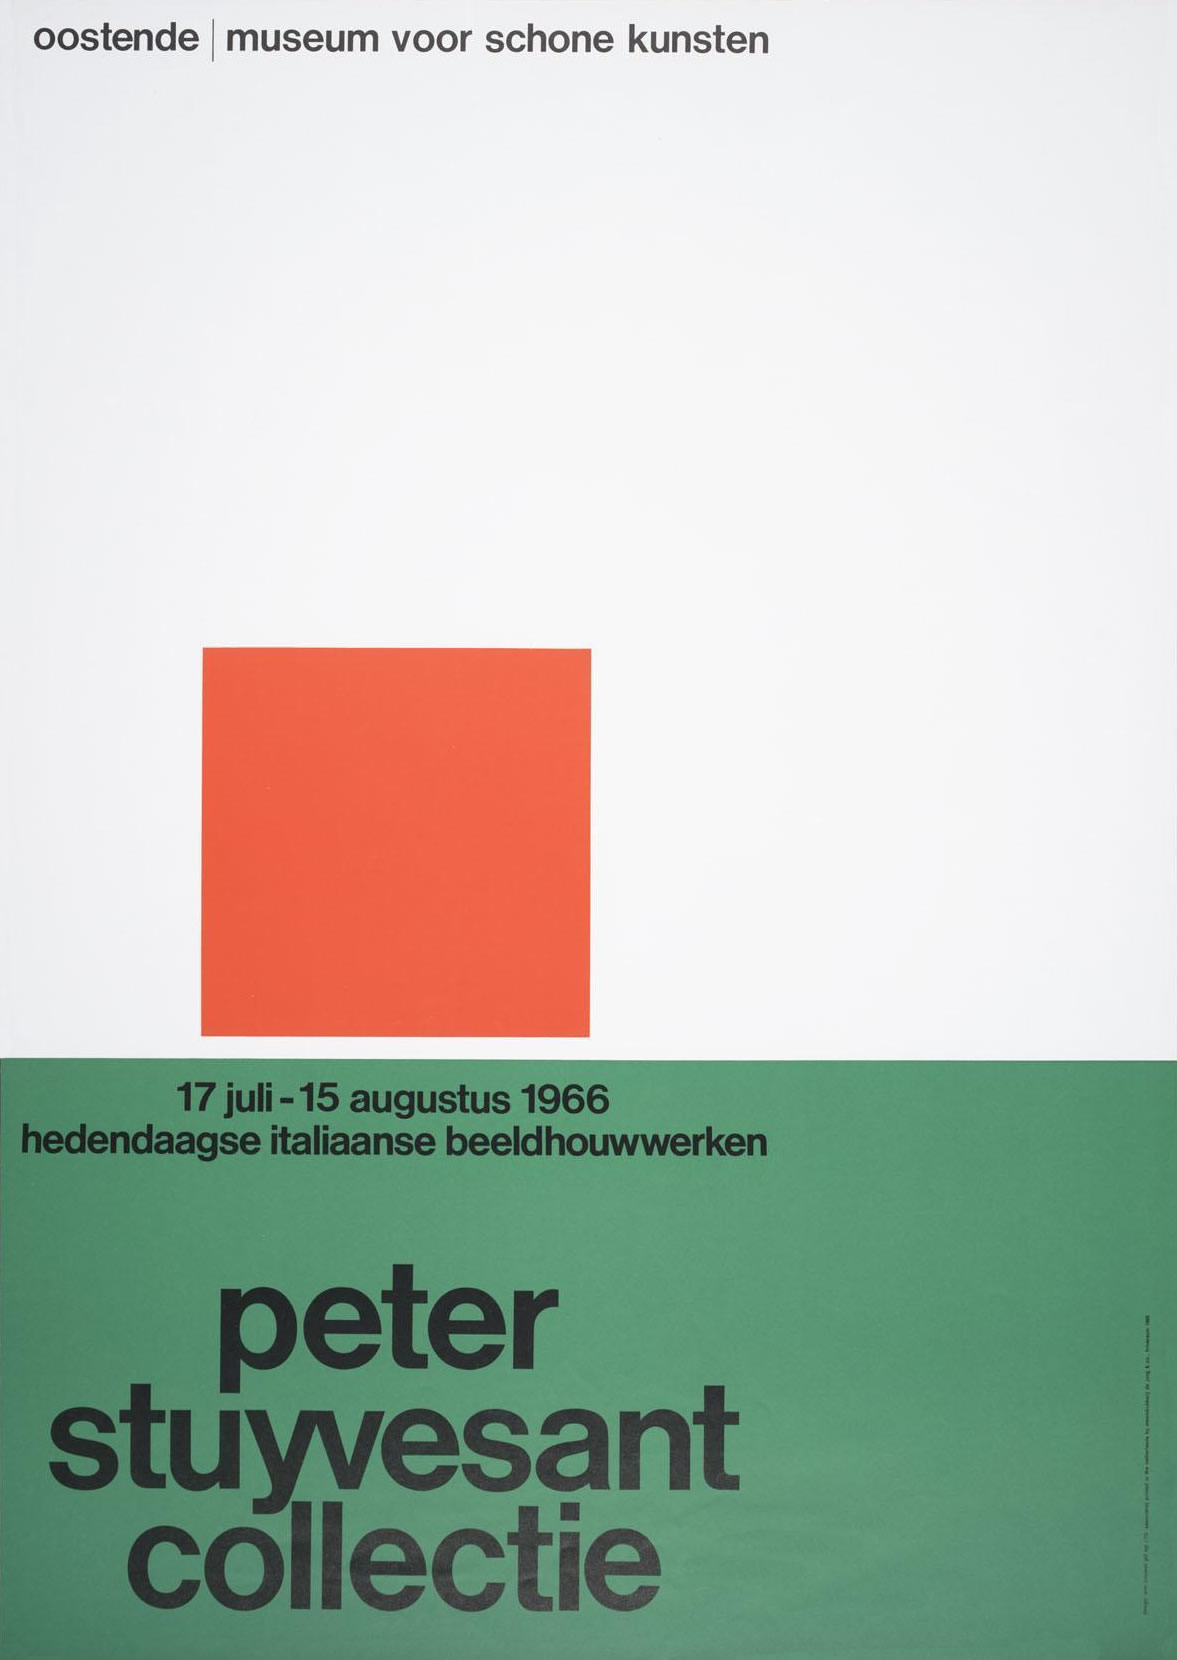 Wim Crouwel: Template for postage stamps Netherlands 1976 Numeral postage stamp. 1976